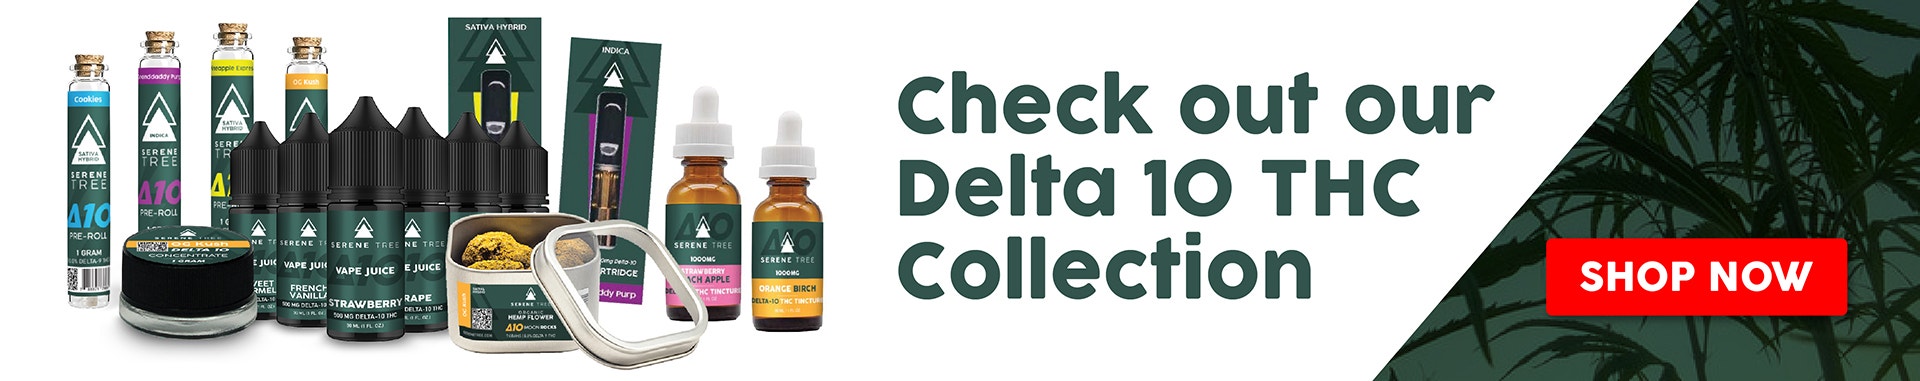 Delta-10 THC products - Buy Now